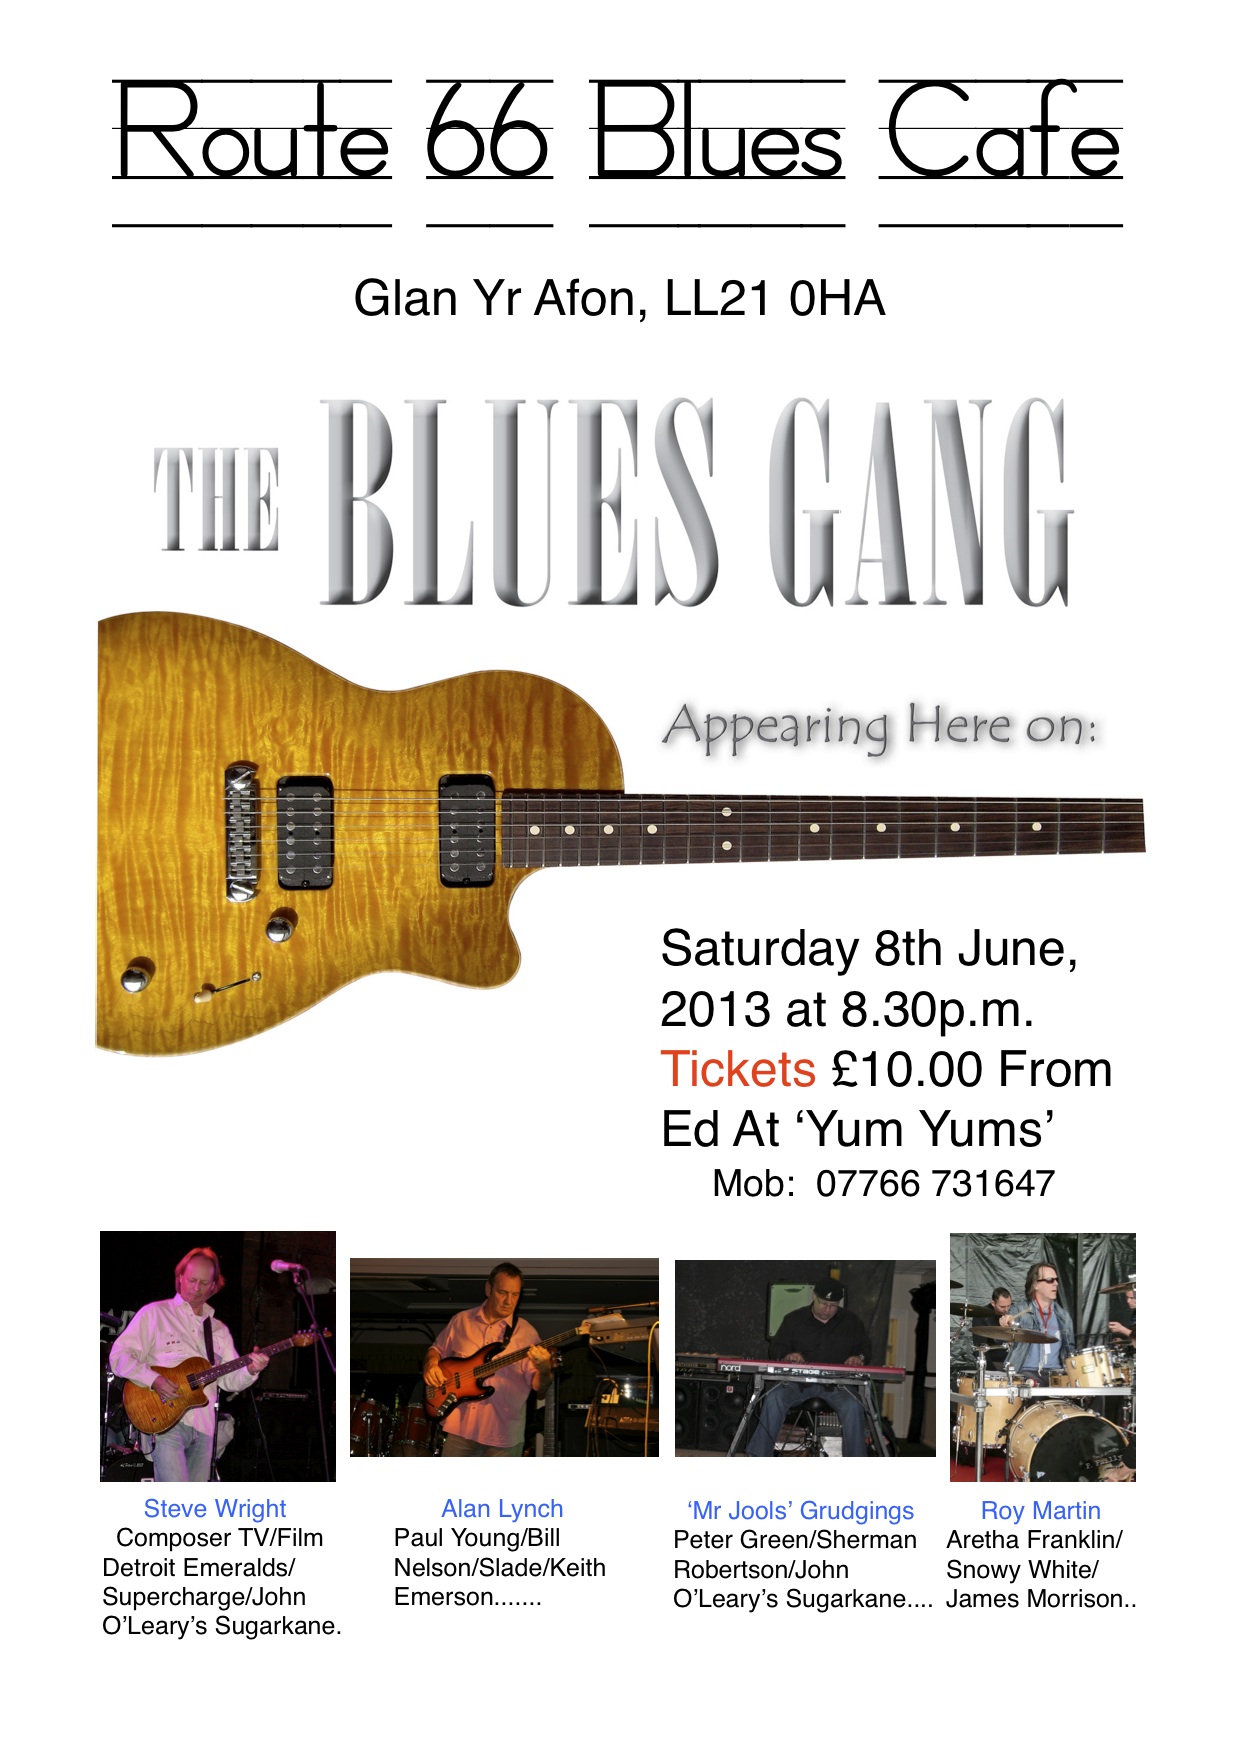 The Blues Gang at Route 66 Blues Cafe 8.06.2013